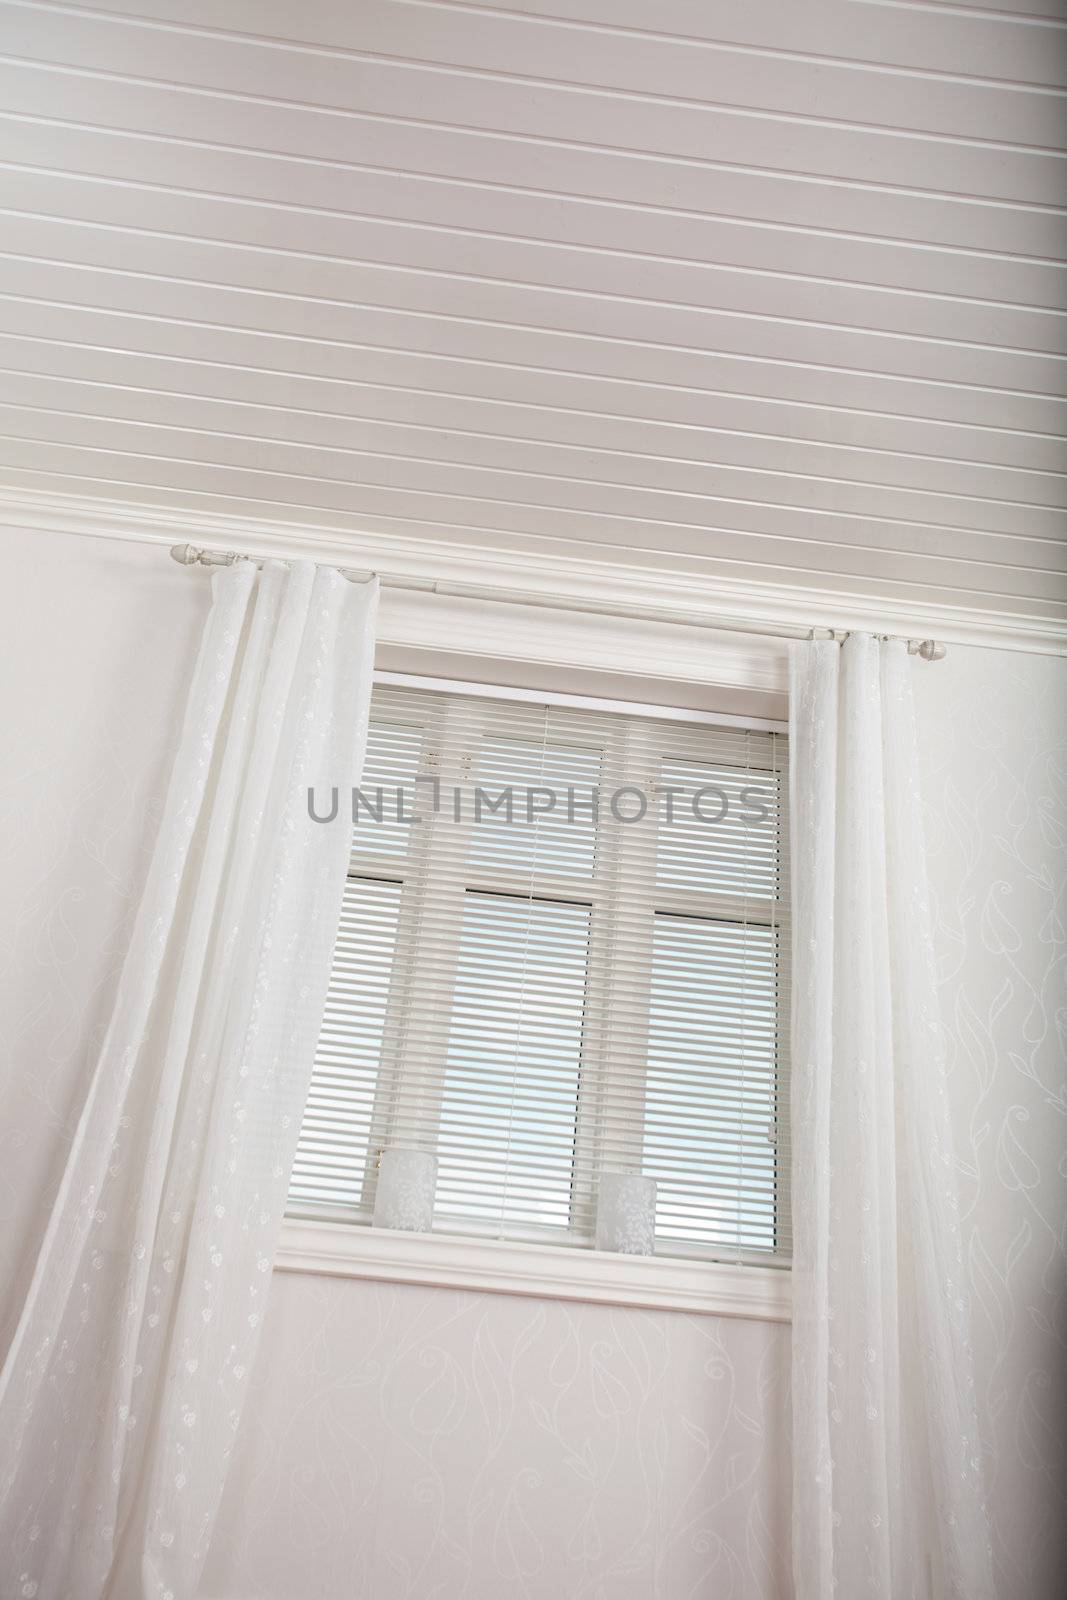 Abstract of a home interior looking up - window and ceiling